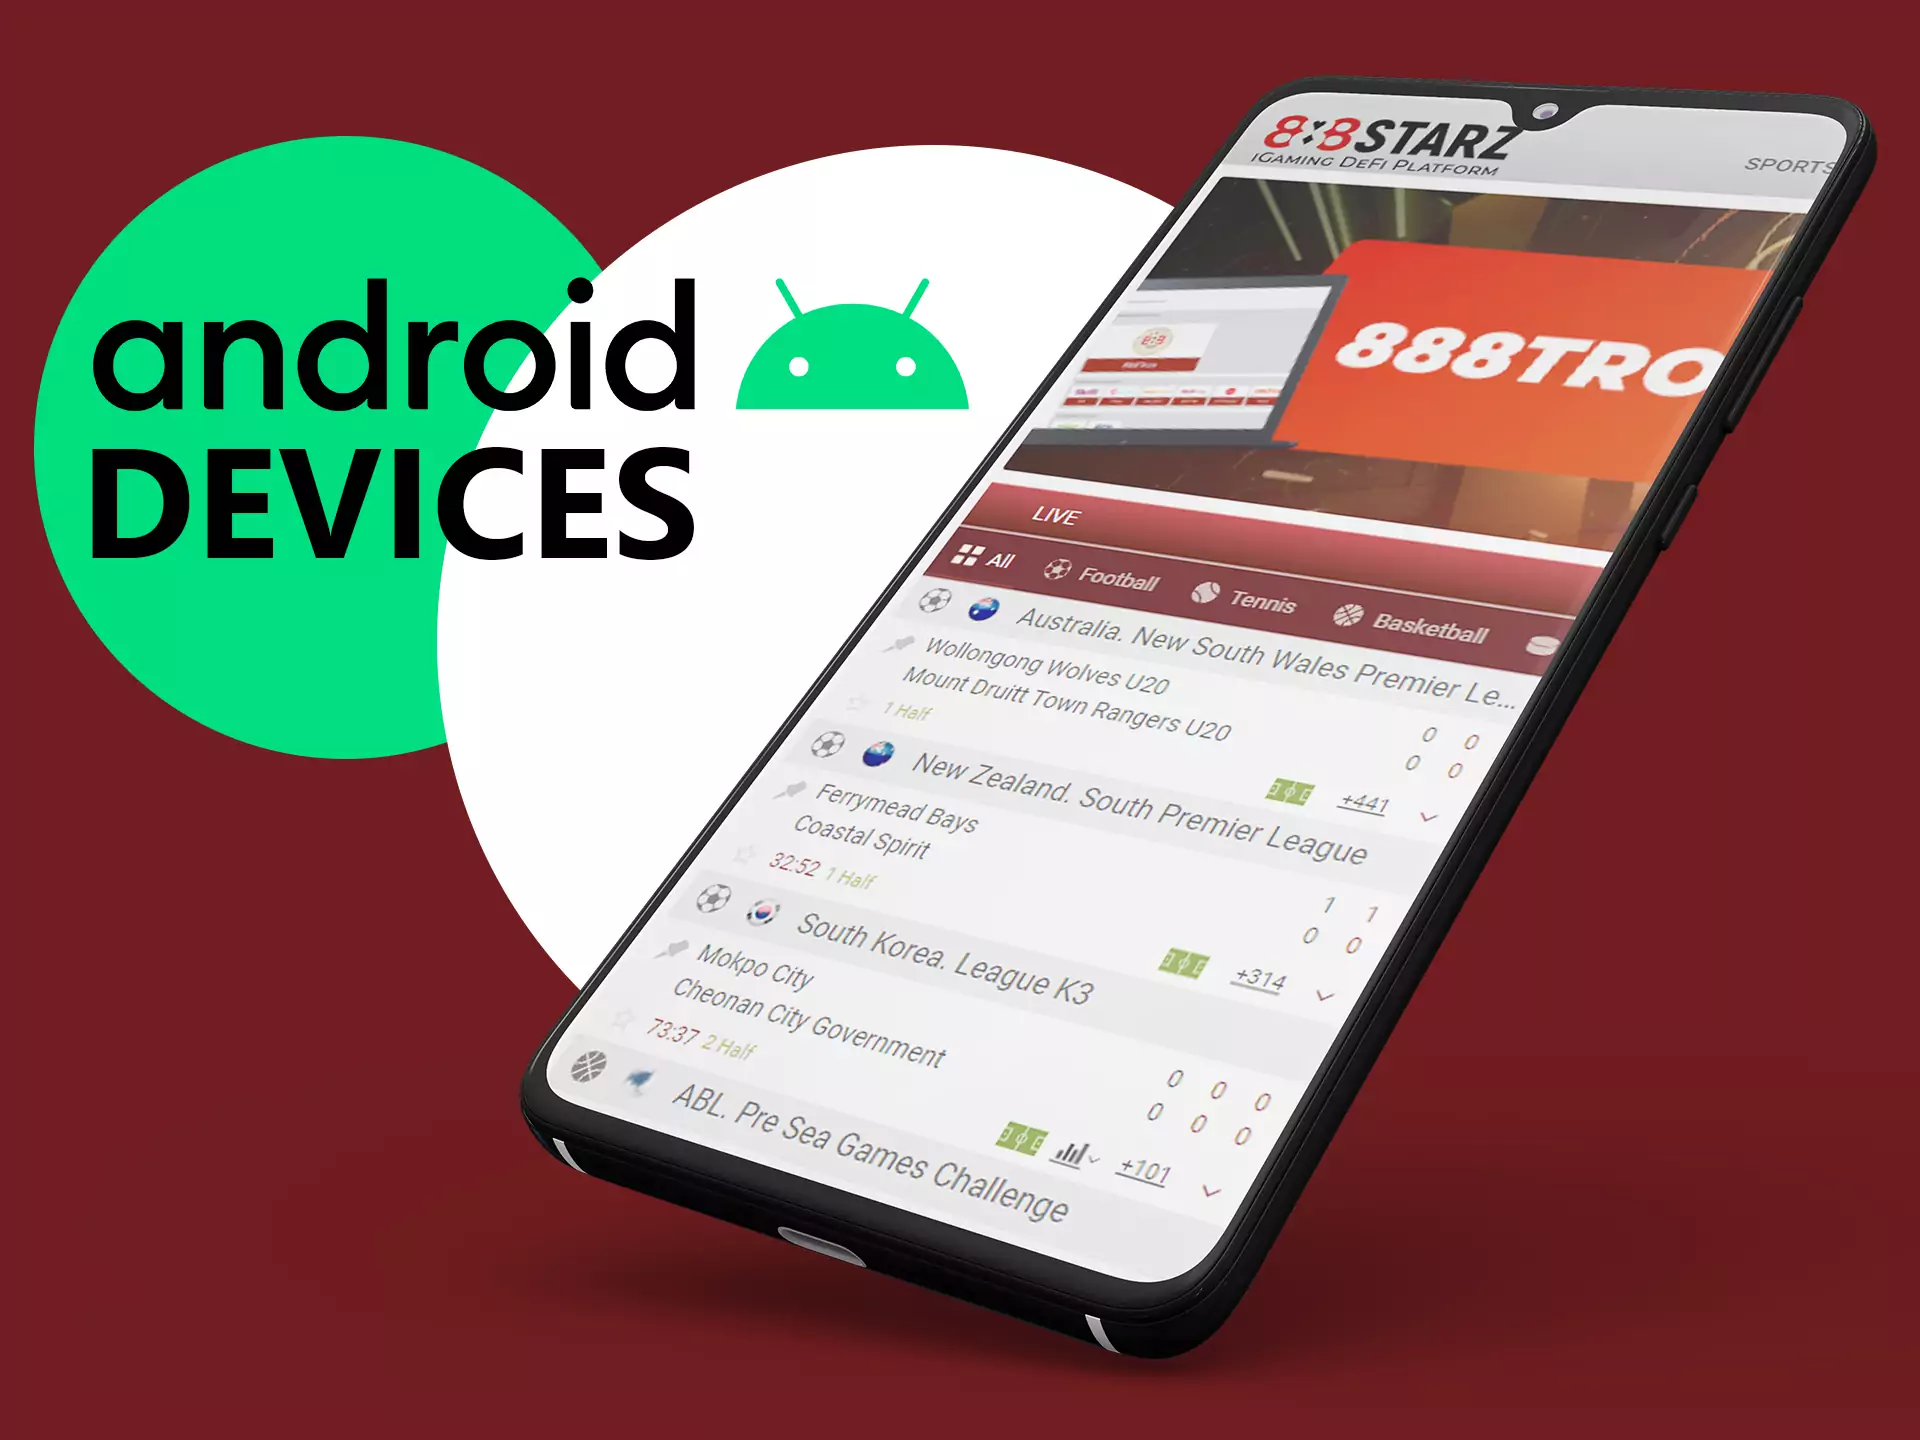 888starz app supports most of Android devices.